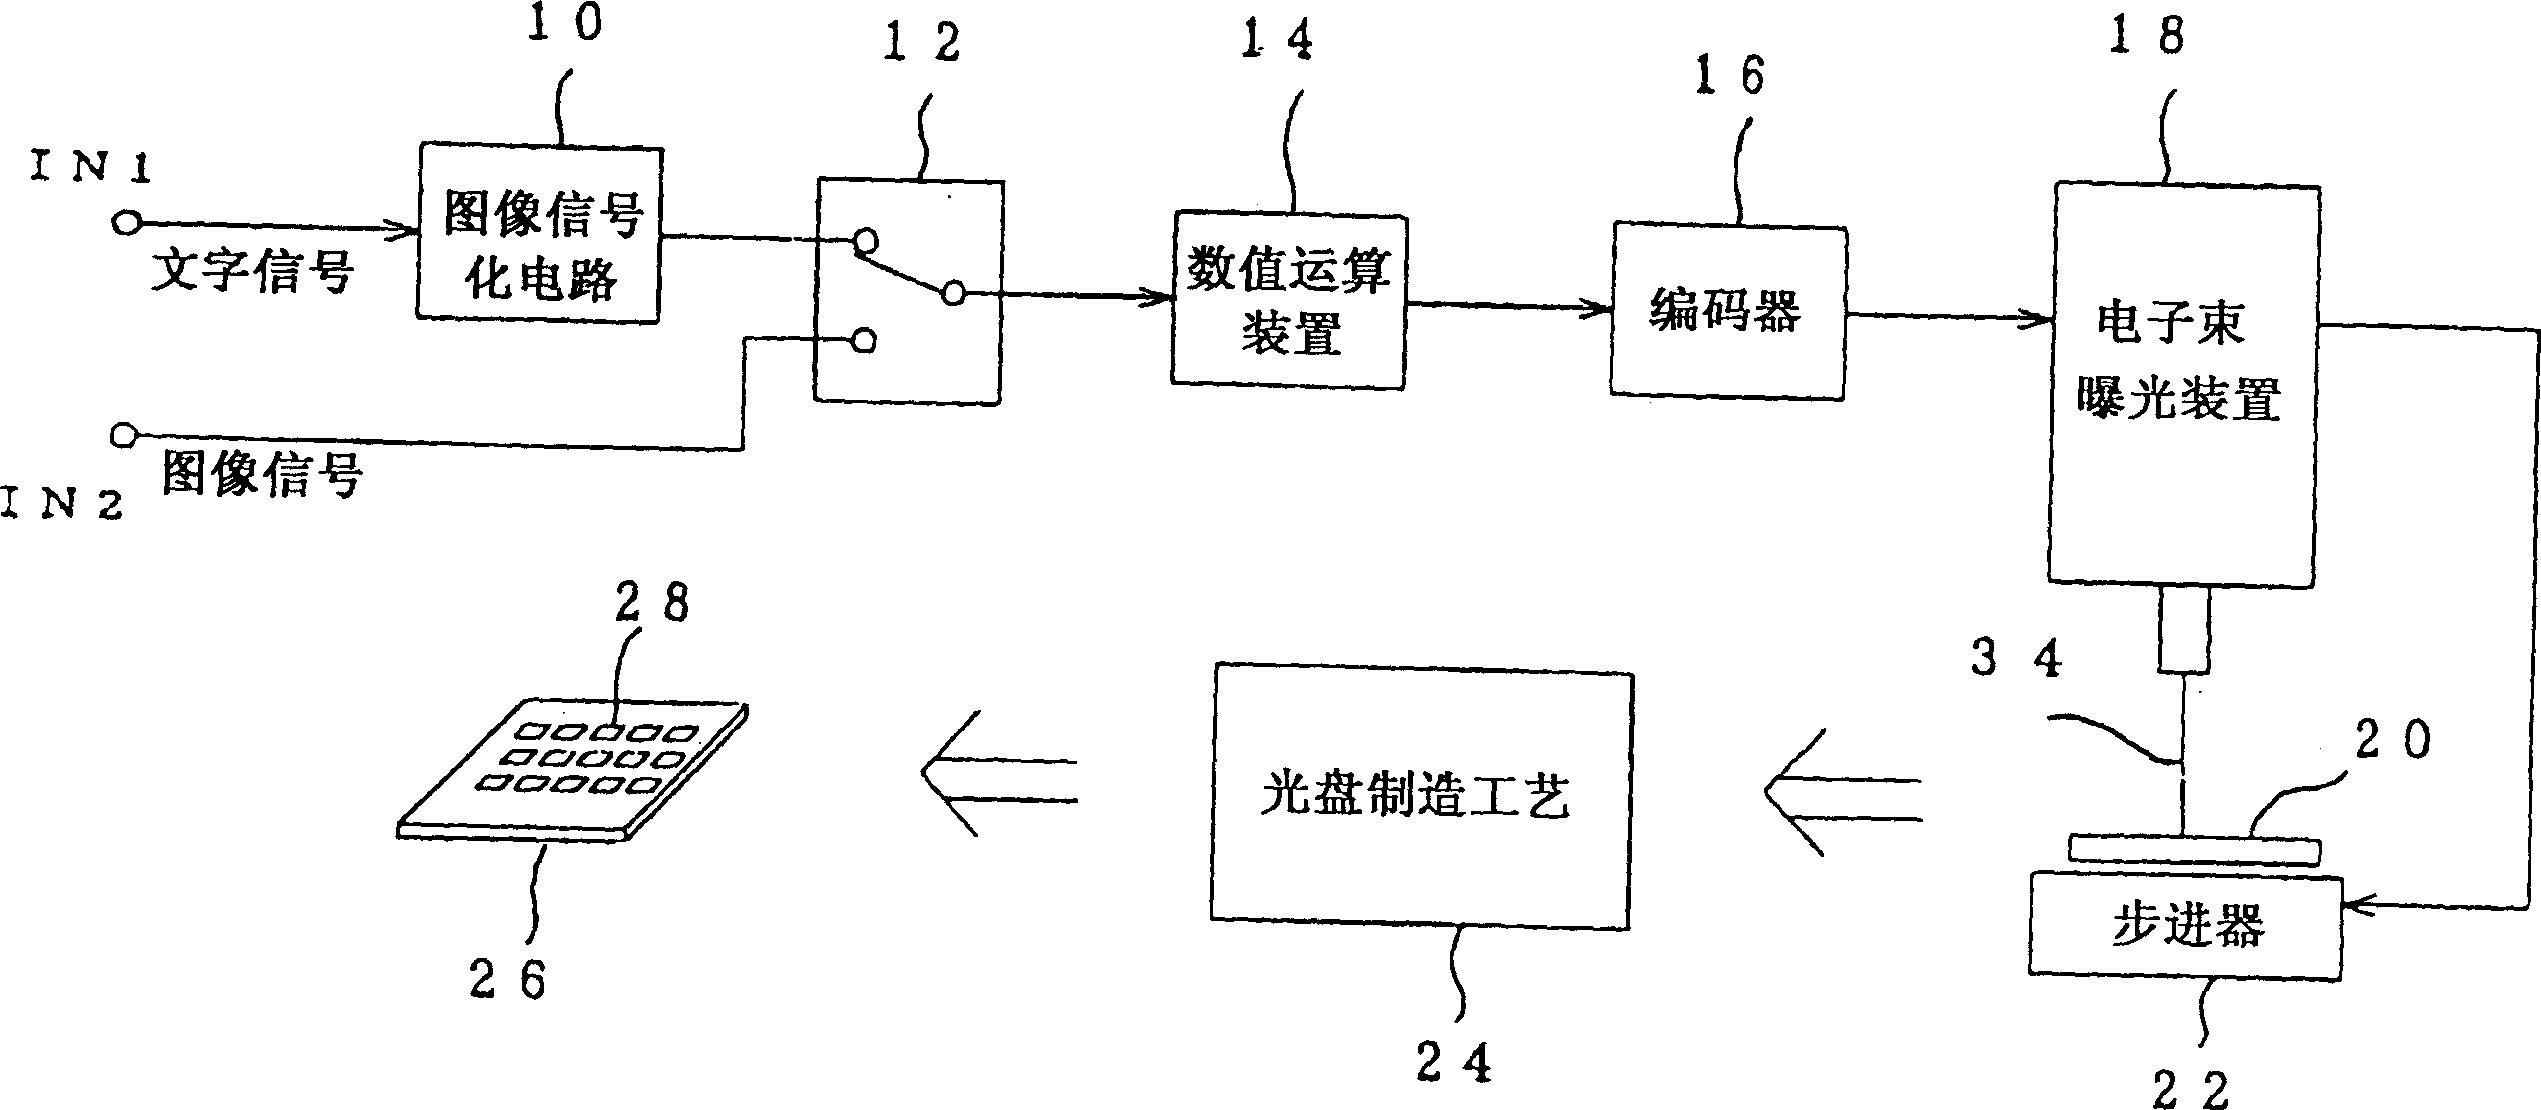 Card vending system and card recognising system